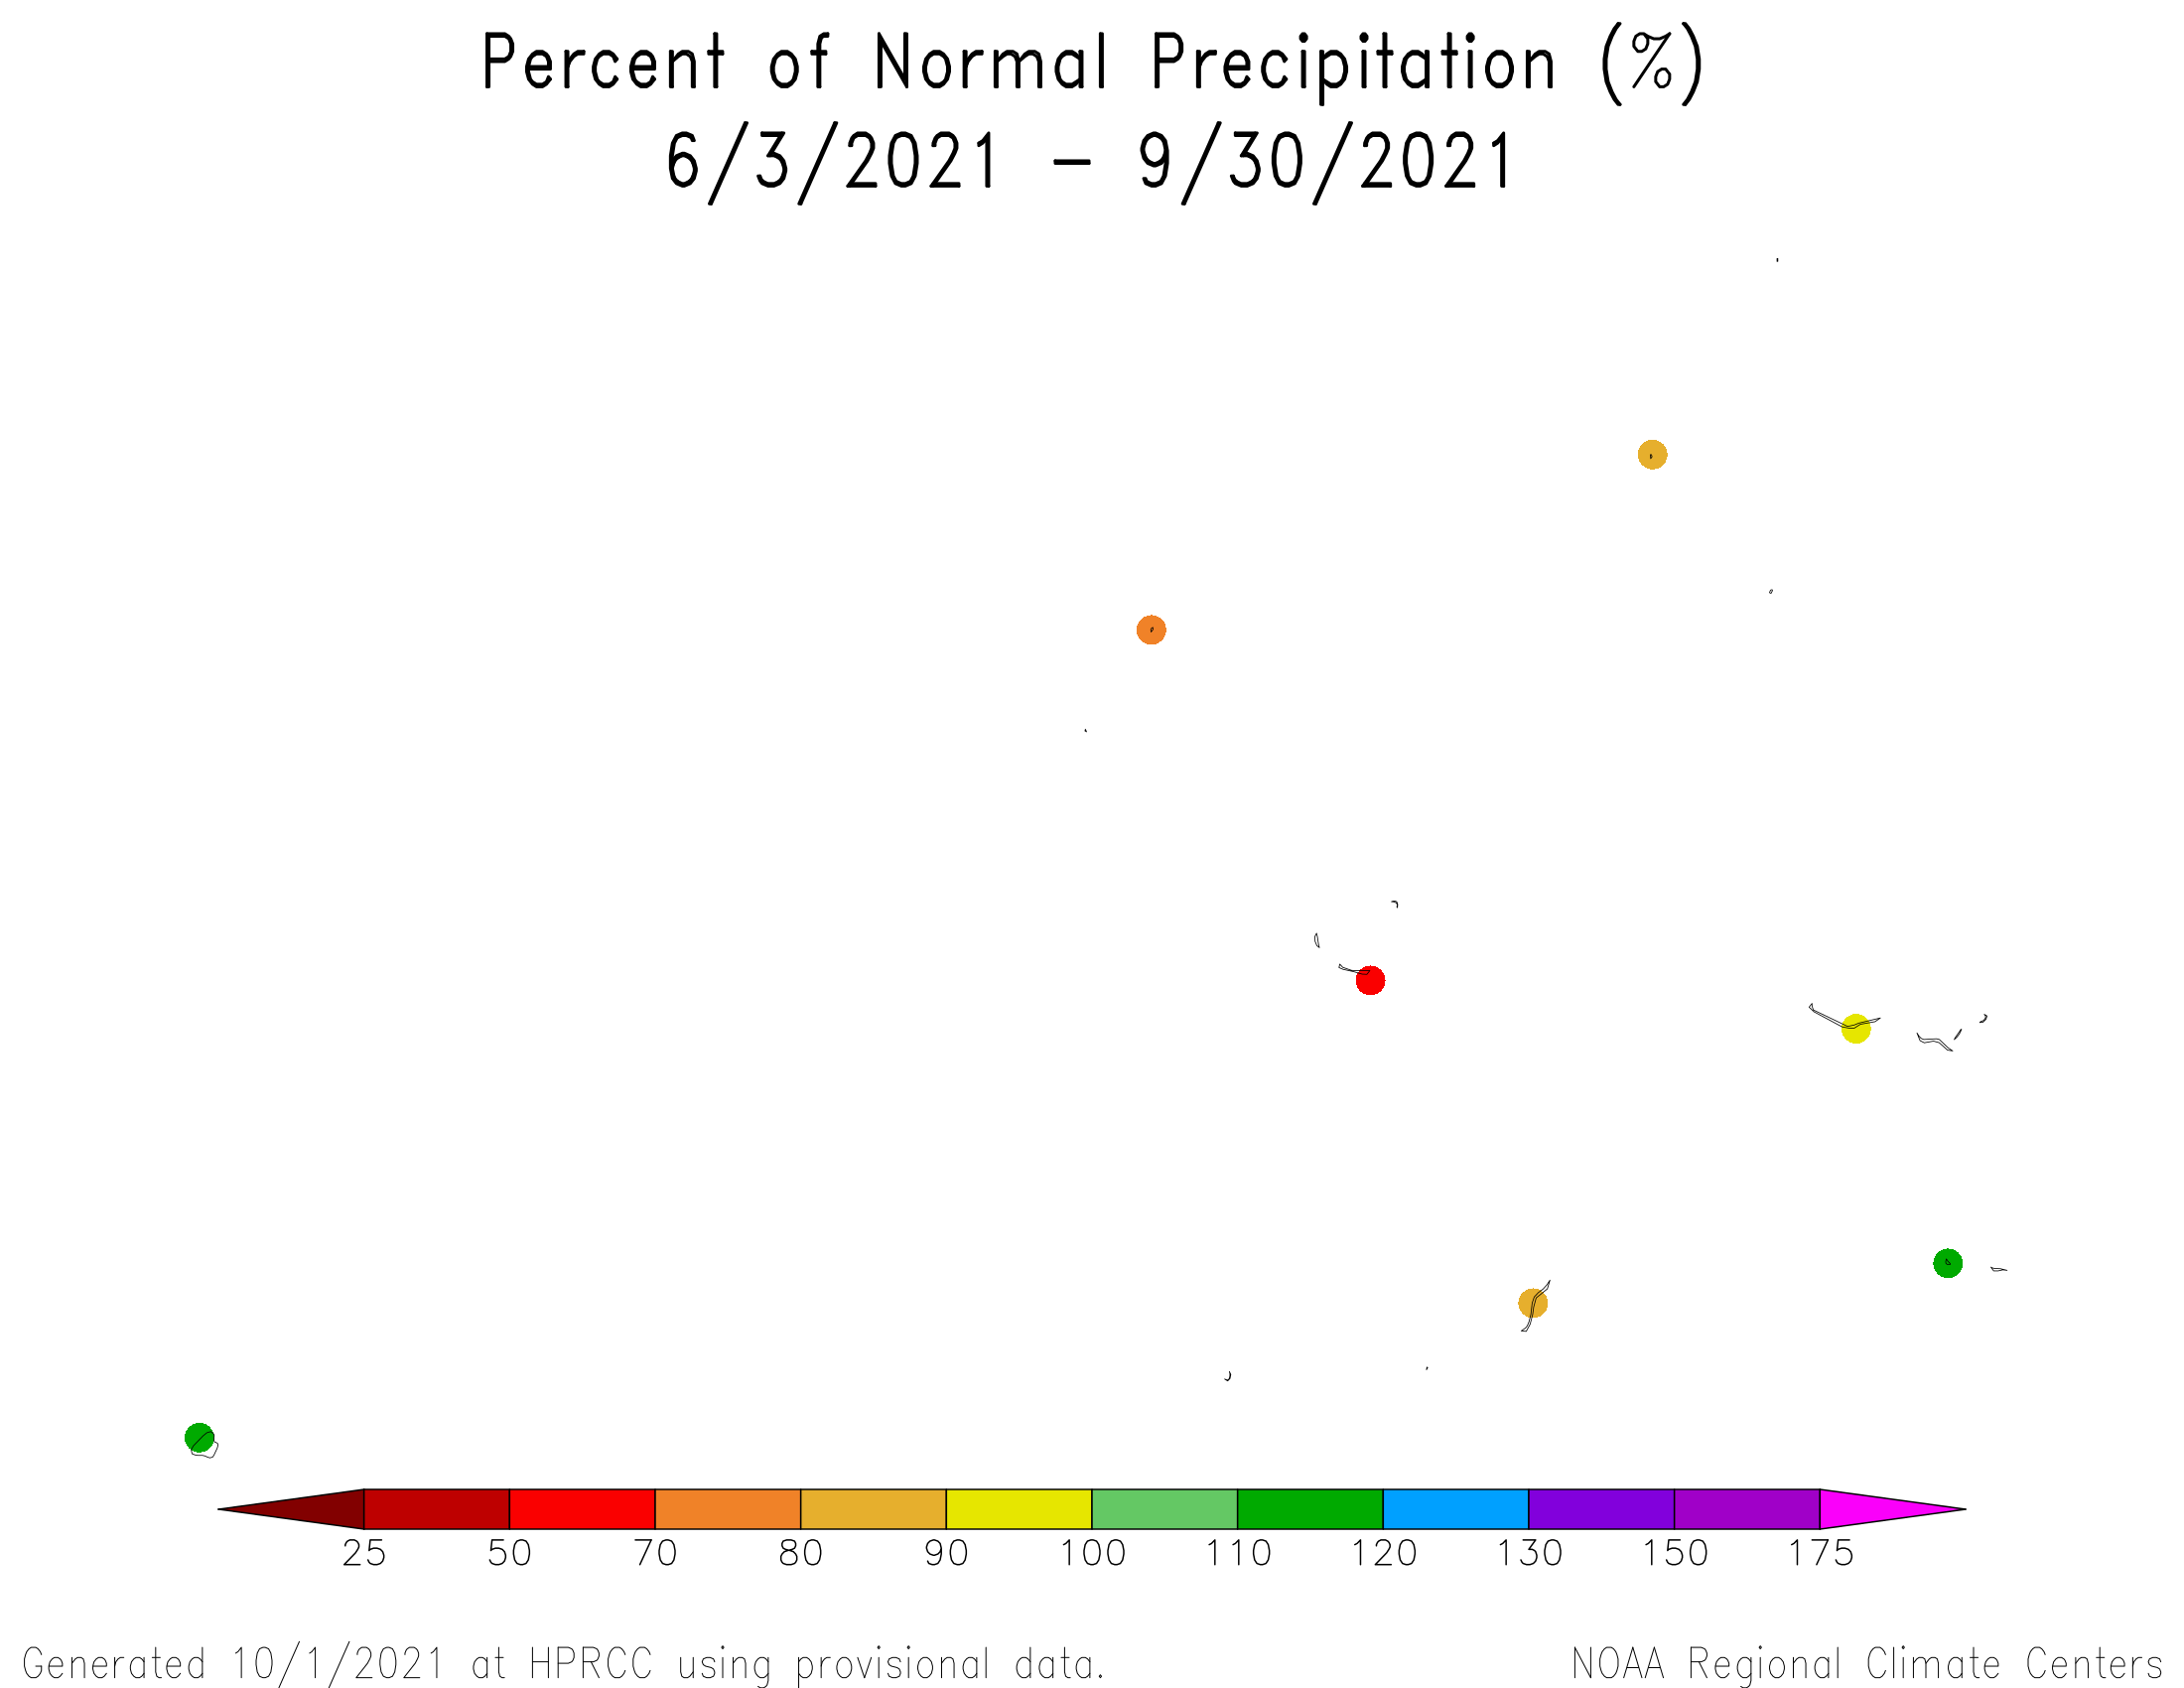 4-month Percent of Normal Precipitation for the Marshalls